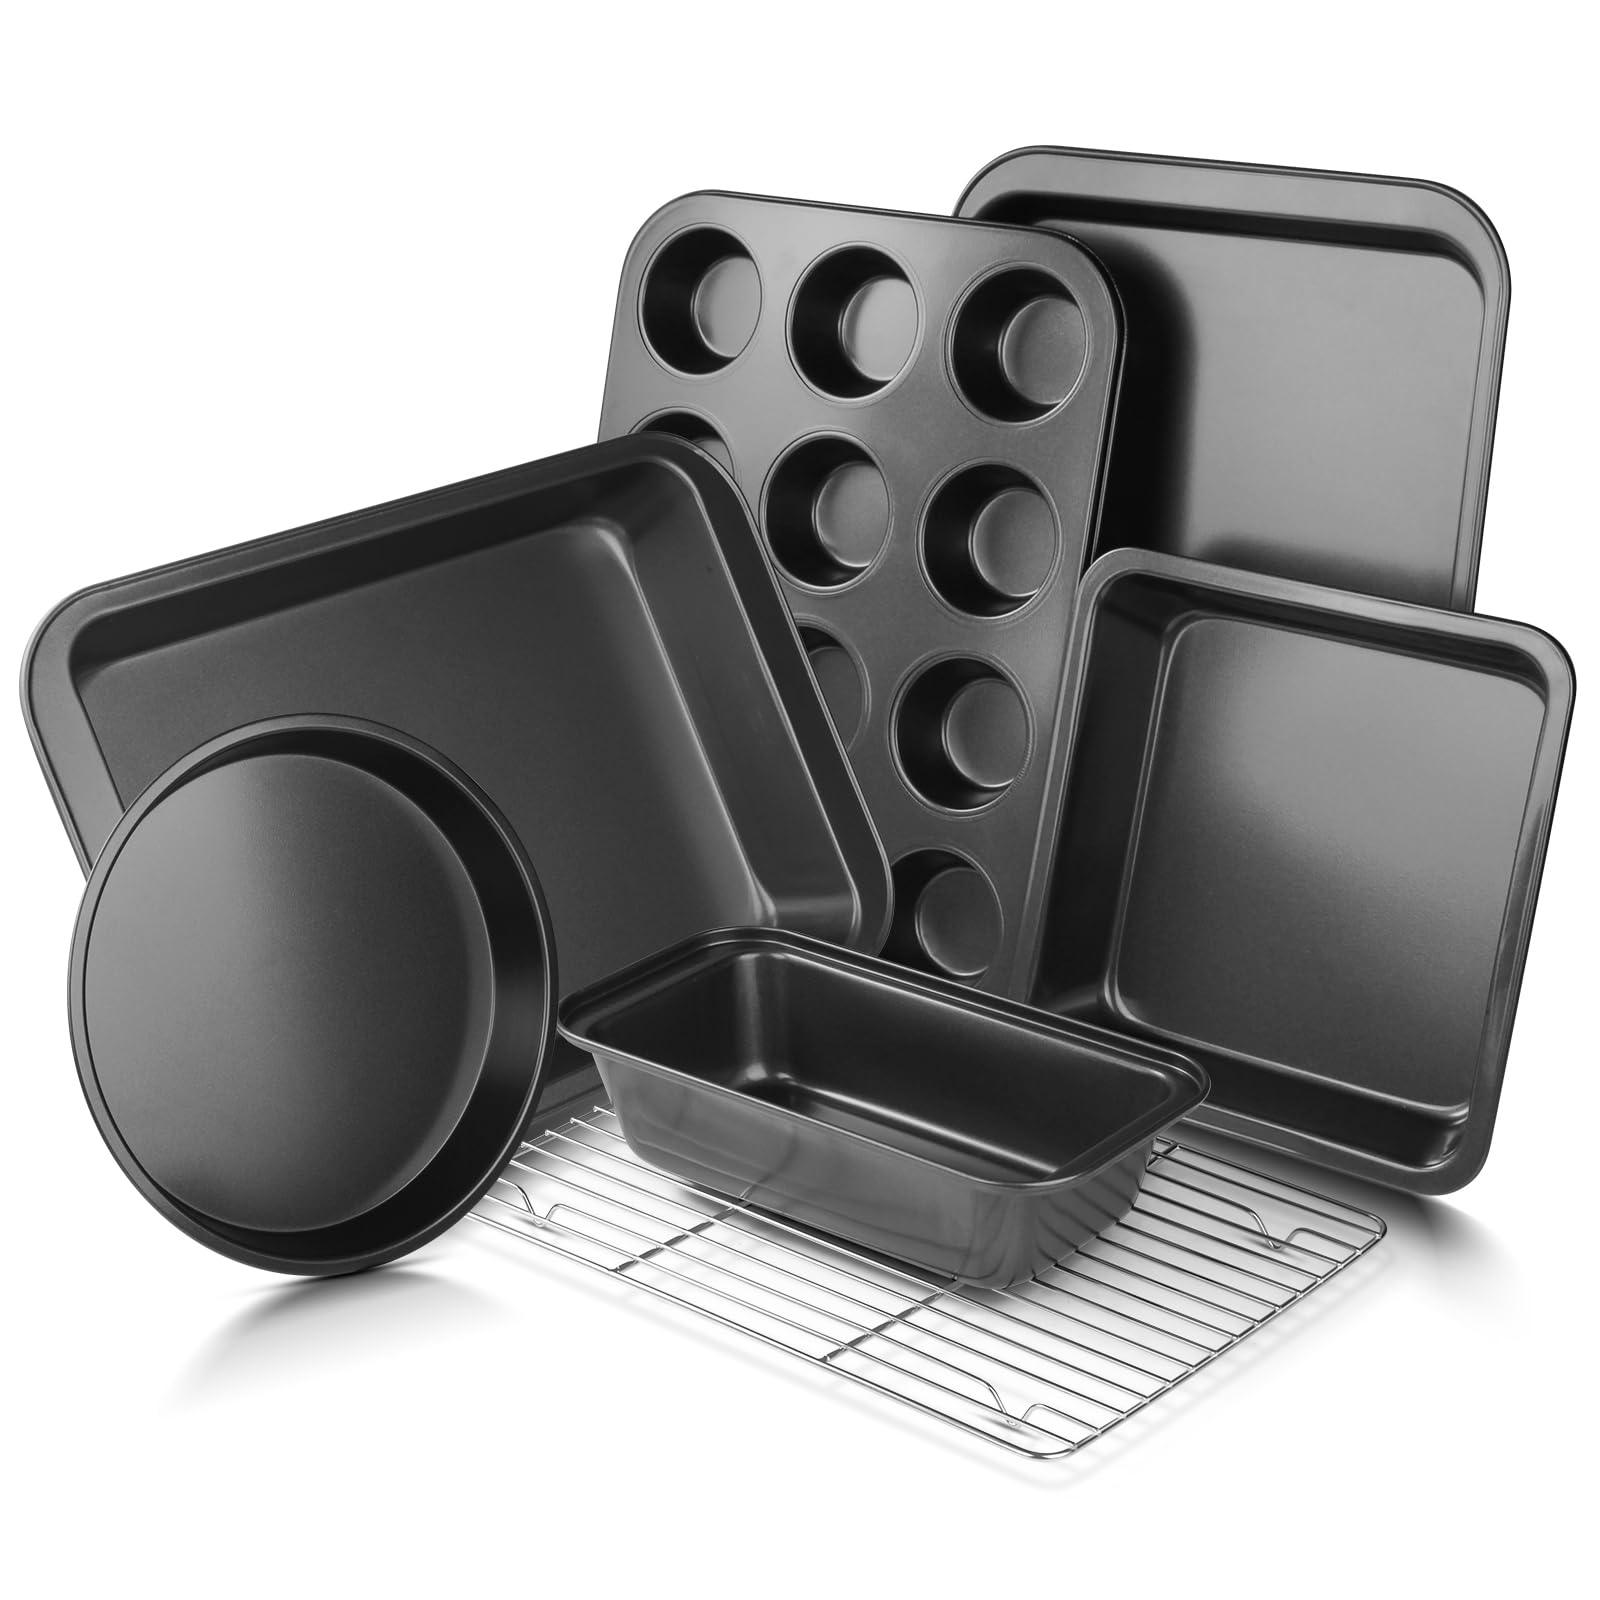 EWFEN Bakeware Sets, Baking Pans Set, Nonstick Oven Pan for Kitchen with Wider Grips, 7-Piece with Round/Square Cake Pan, Loaf Pan, Muffin Pan, Cookie Sheet, Roast Pan, Cooling Rack, Carbon Steel Bake - CookCave